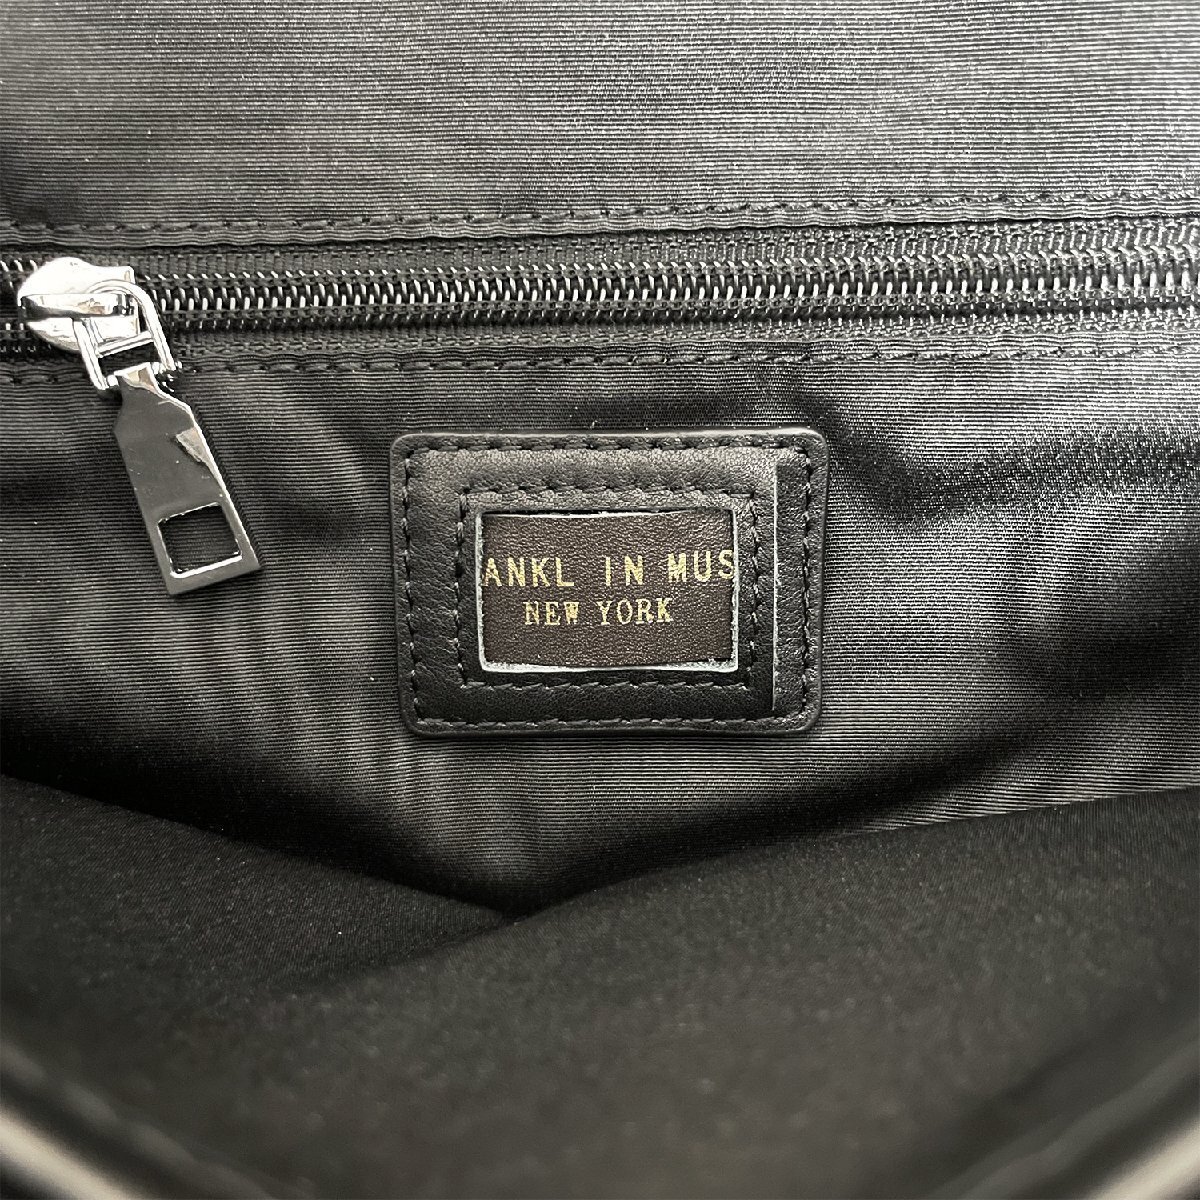  standard regular price 11 ten thousand FRANKLIN MUSK* America * New York departure briefcase high quality sheep leather original leather water-repellent light weight belt attaching 2way commuting going to school 